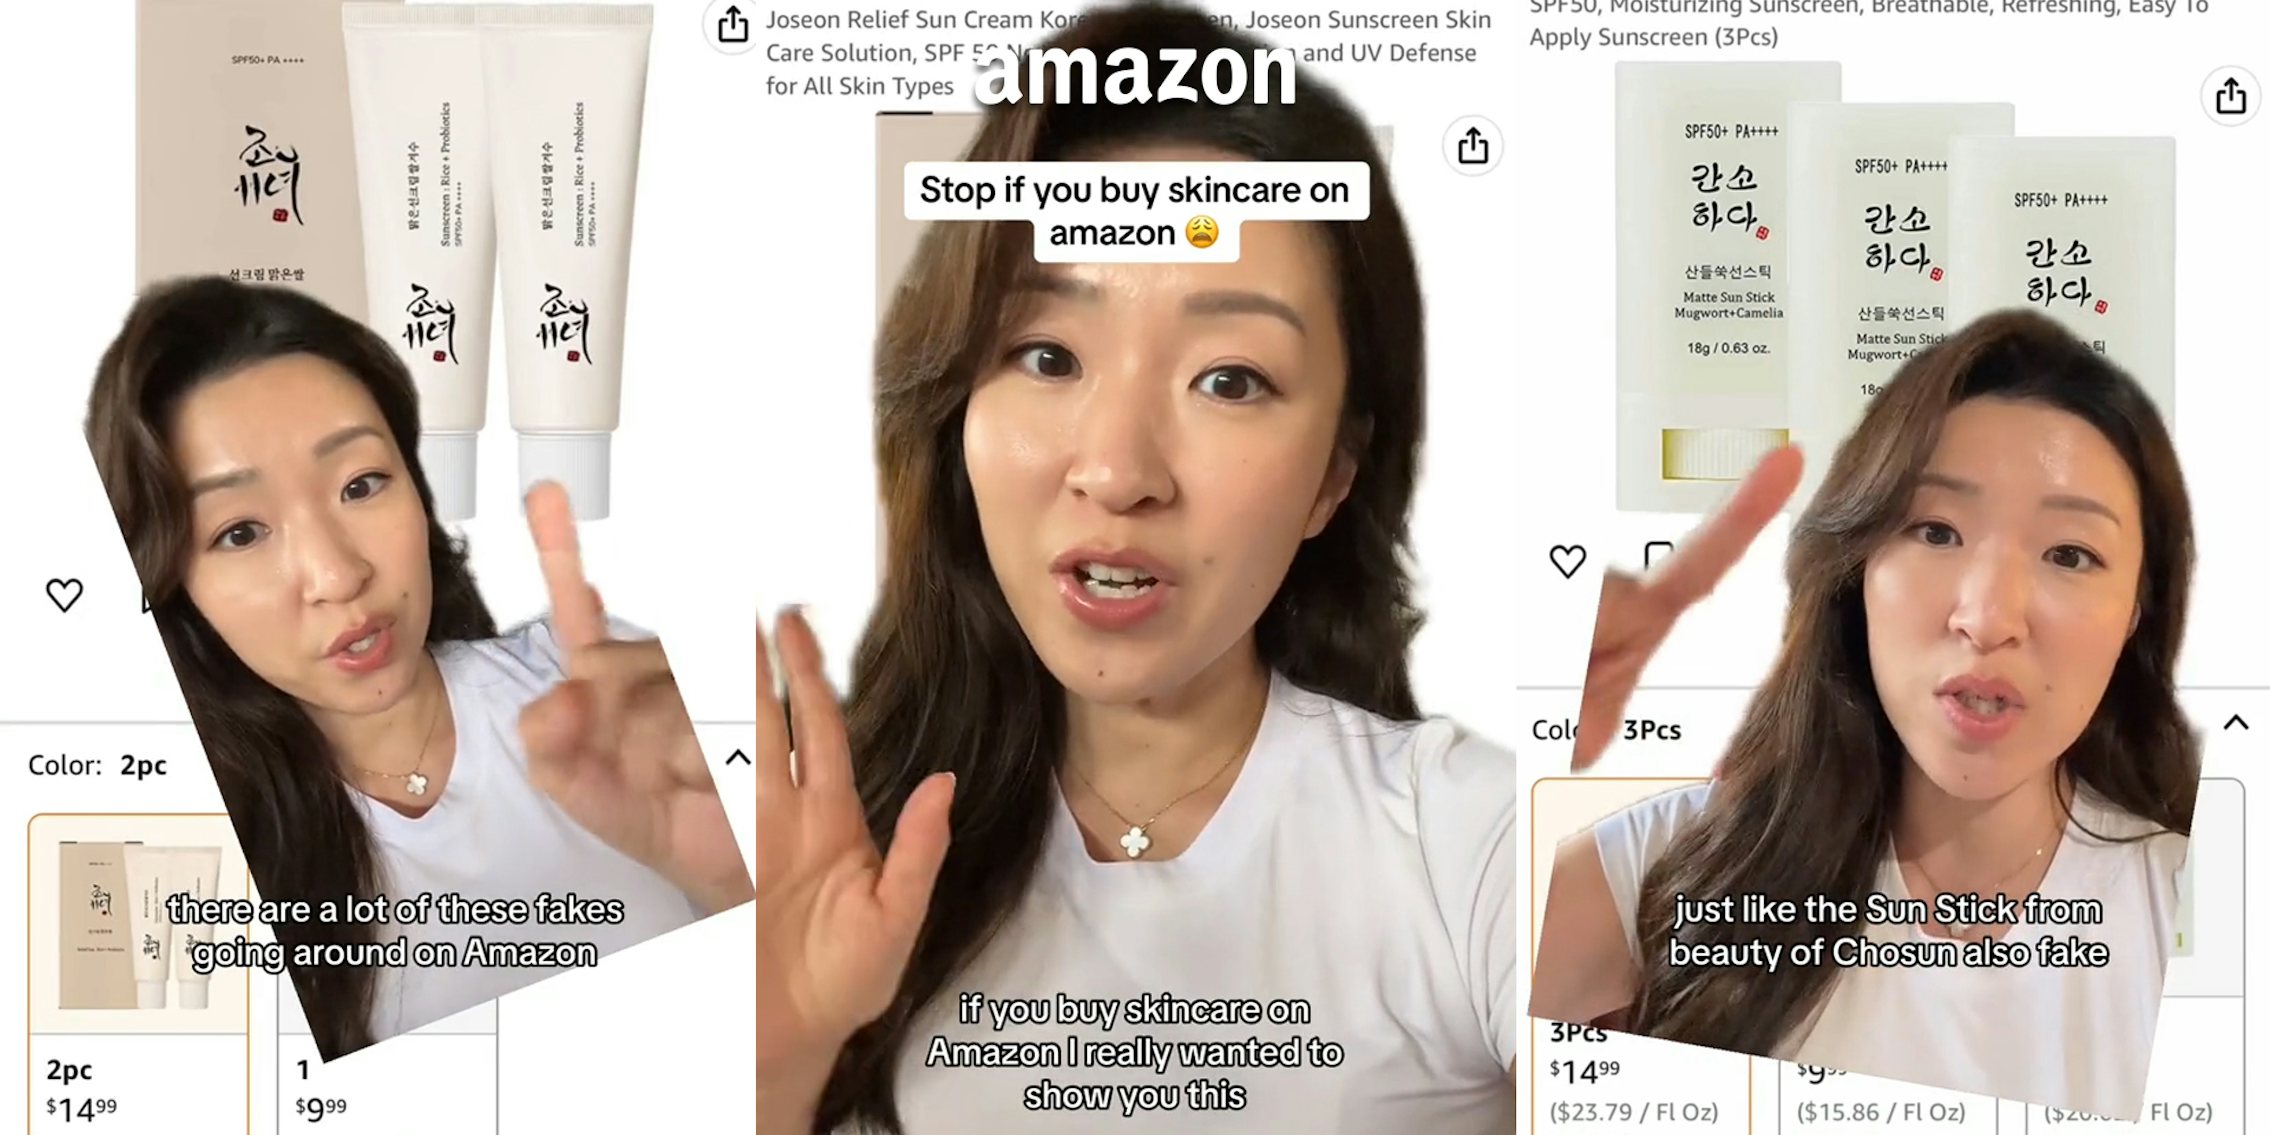 woman greenscreen TikTok over Amazon beauty products with caption 'there are a lot of these fakes going around on Amazon' (l) woman greenscreen TikTok over Amazon beauty products with caption 'Stop if you buy skincare on amazon if you buy skincare on Amazon I really wanted to show you this' with Amazon logo above (c) woman greenscreen TikTok over Amazon beauty products with caption 'just like the Sun Stick from beauty of Chosun also fake' (r)